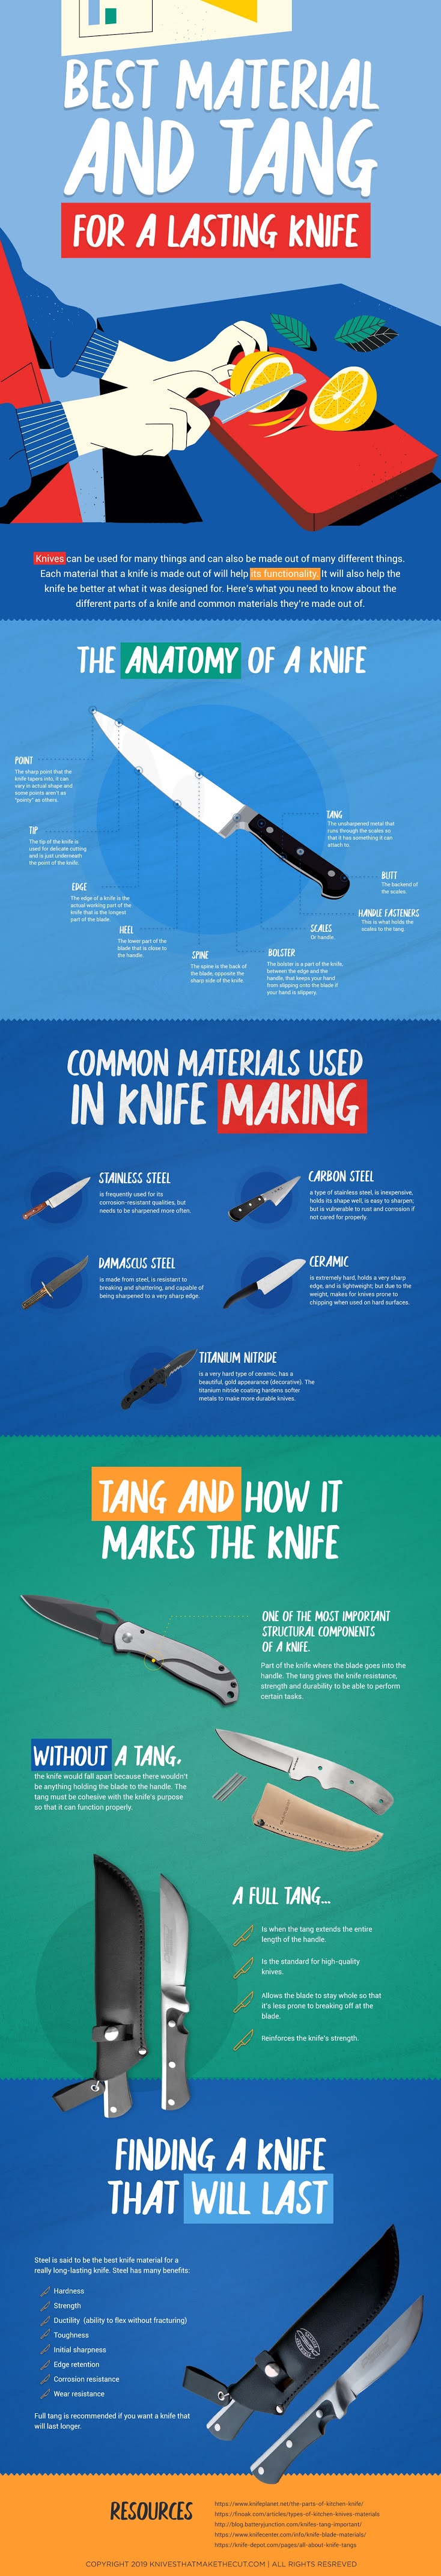 Best Material and Tang for a Lasting Knife #infographic